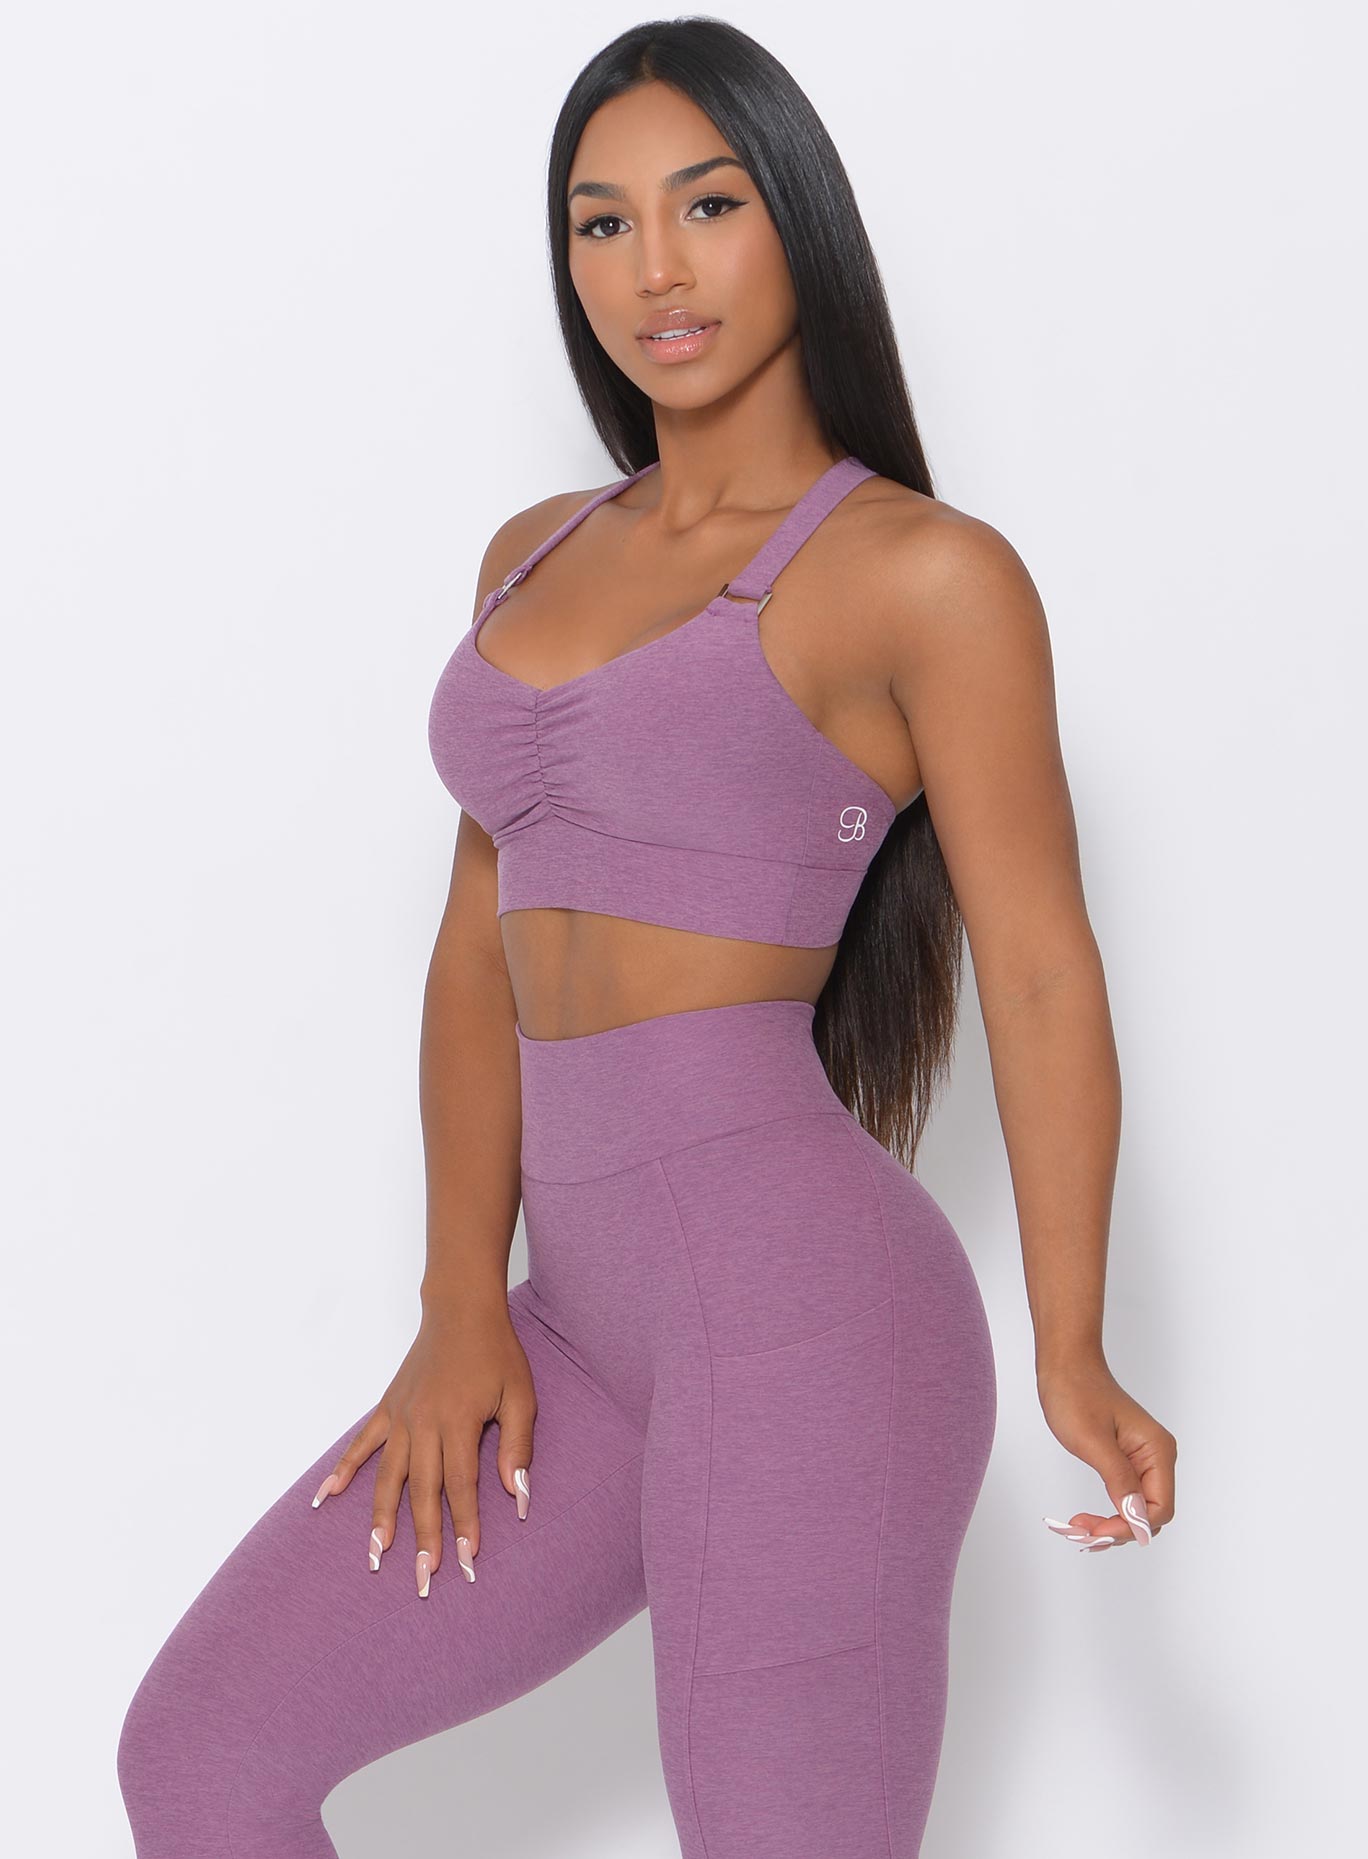 Left side view of the model angled left wearing our perfection sports bra in lavender and a matching shorts